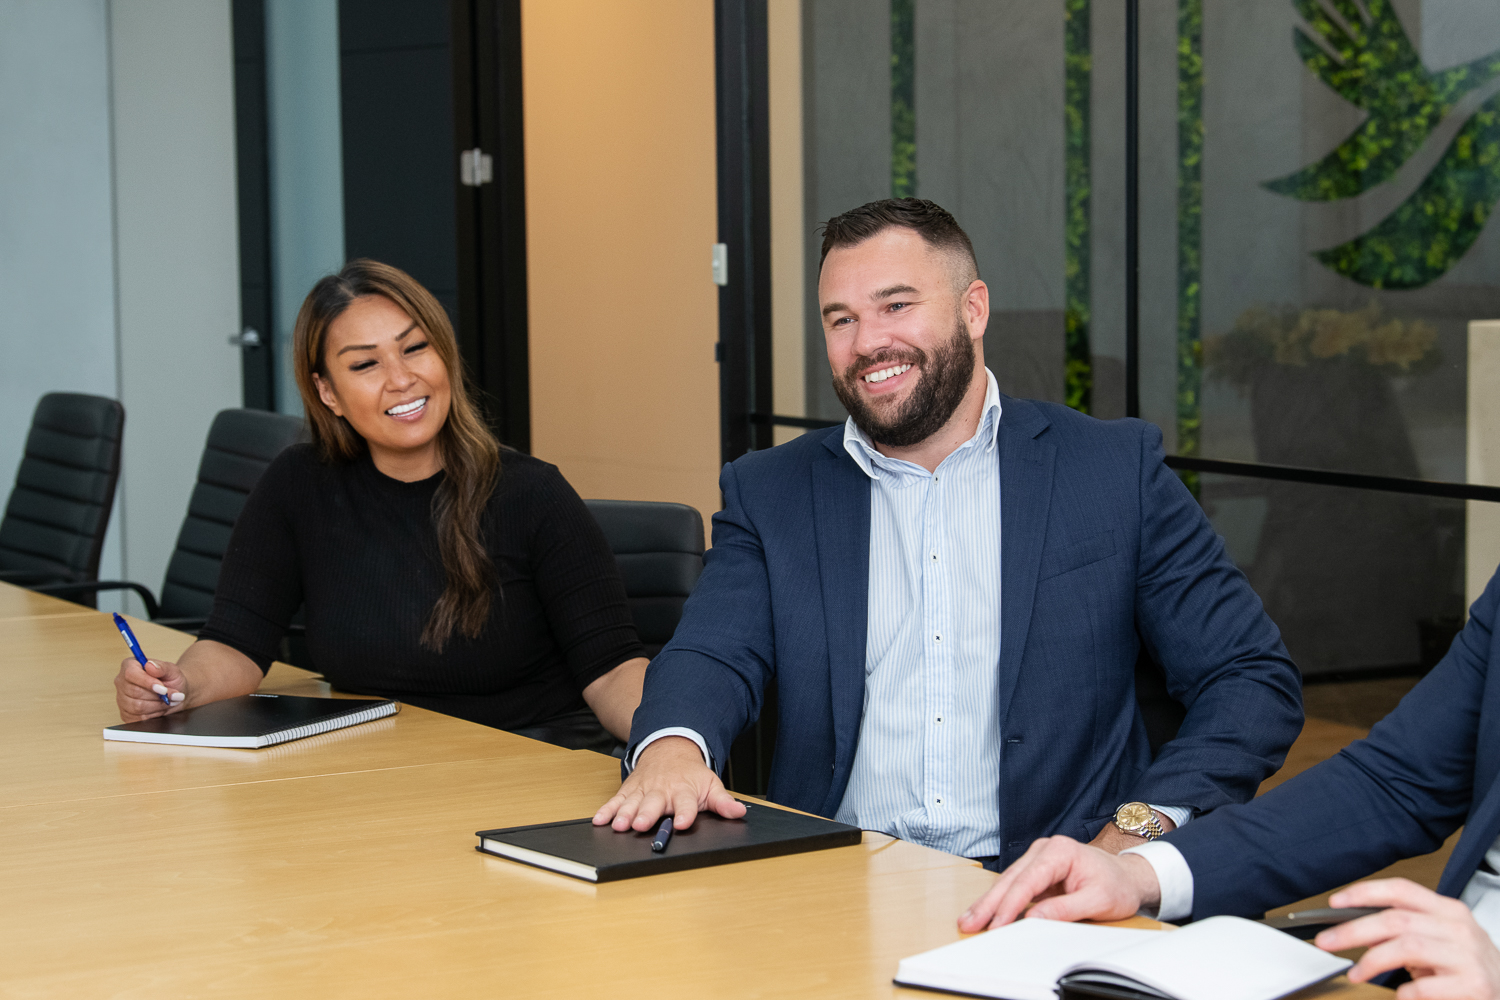 Personal branding photography of melbourne business - in-situ and working together in a collaborative way. Man and woman smiling during a boardroom meeting.